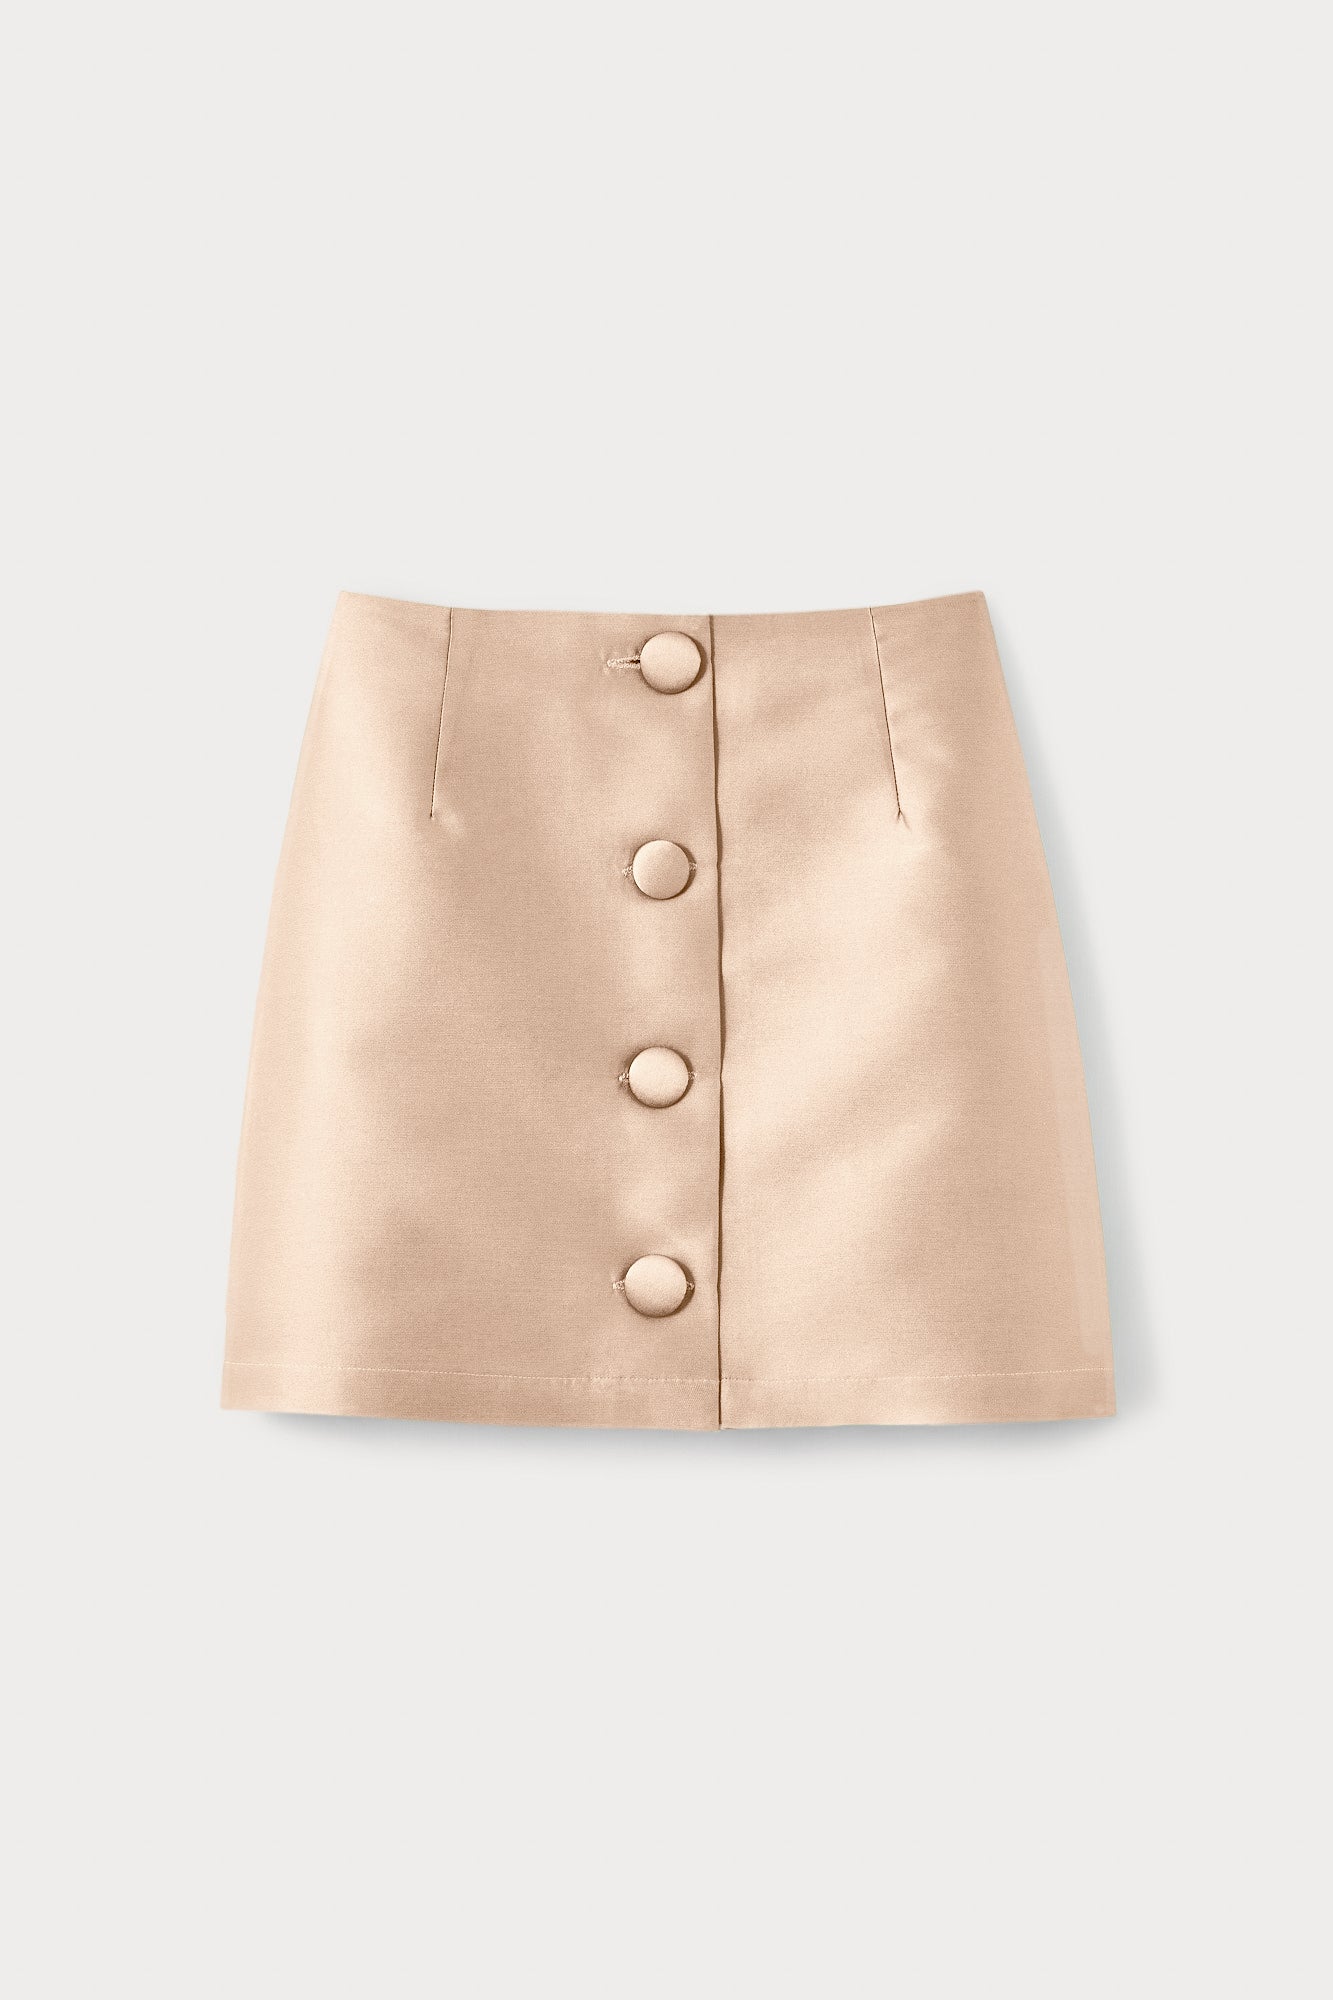 NUDE Satin Mini Skirt with buttons